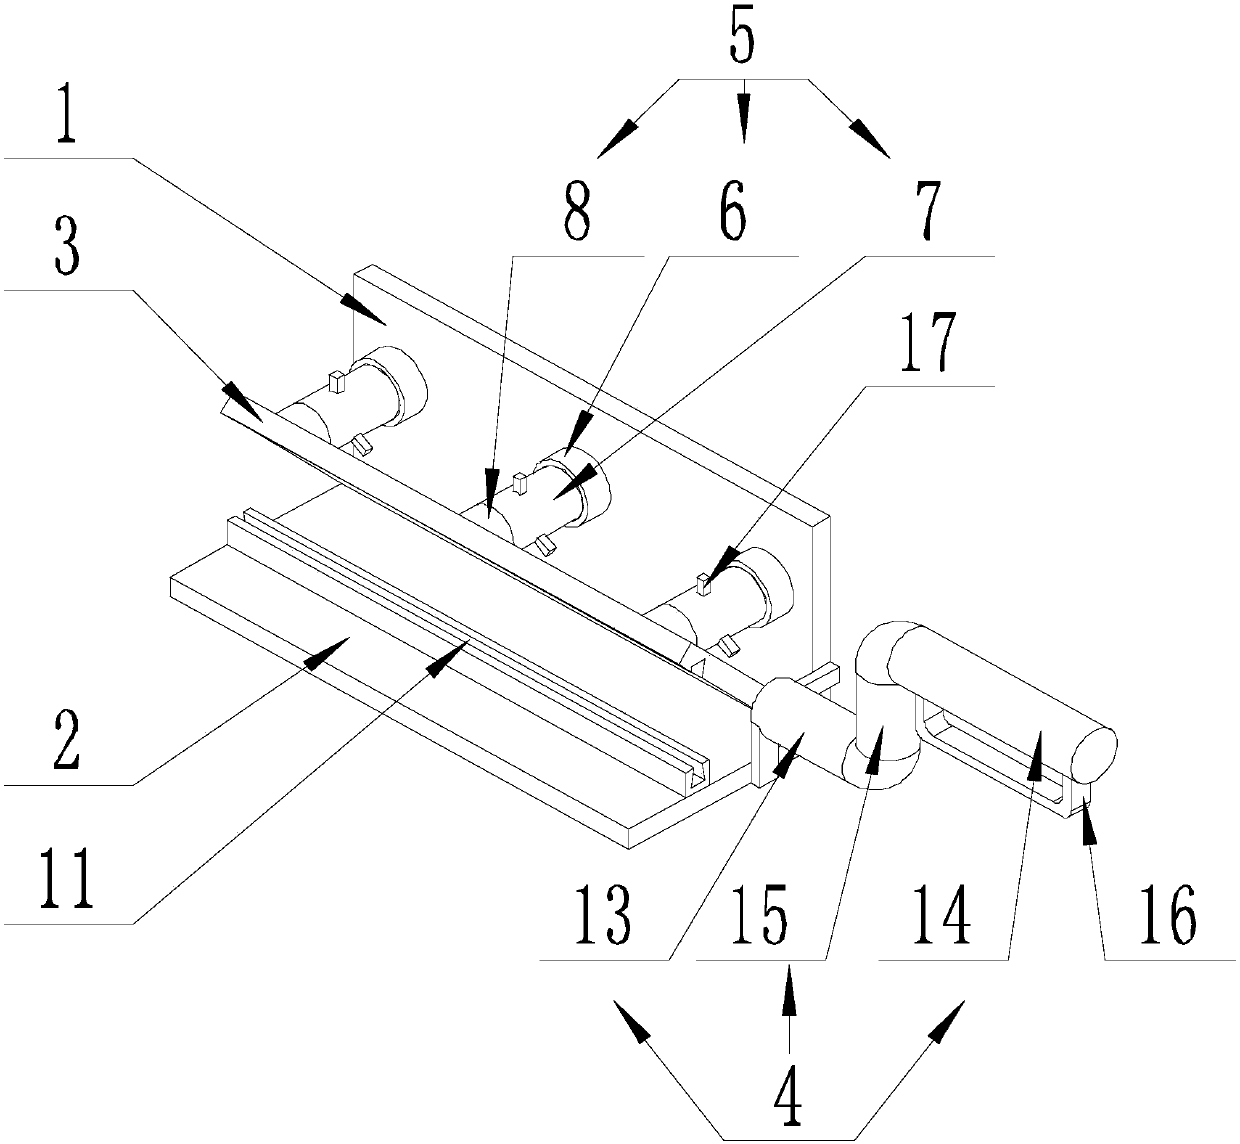 Plastering device for connecting position of wall body and ceiling